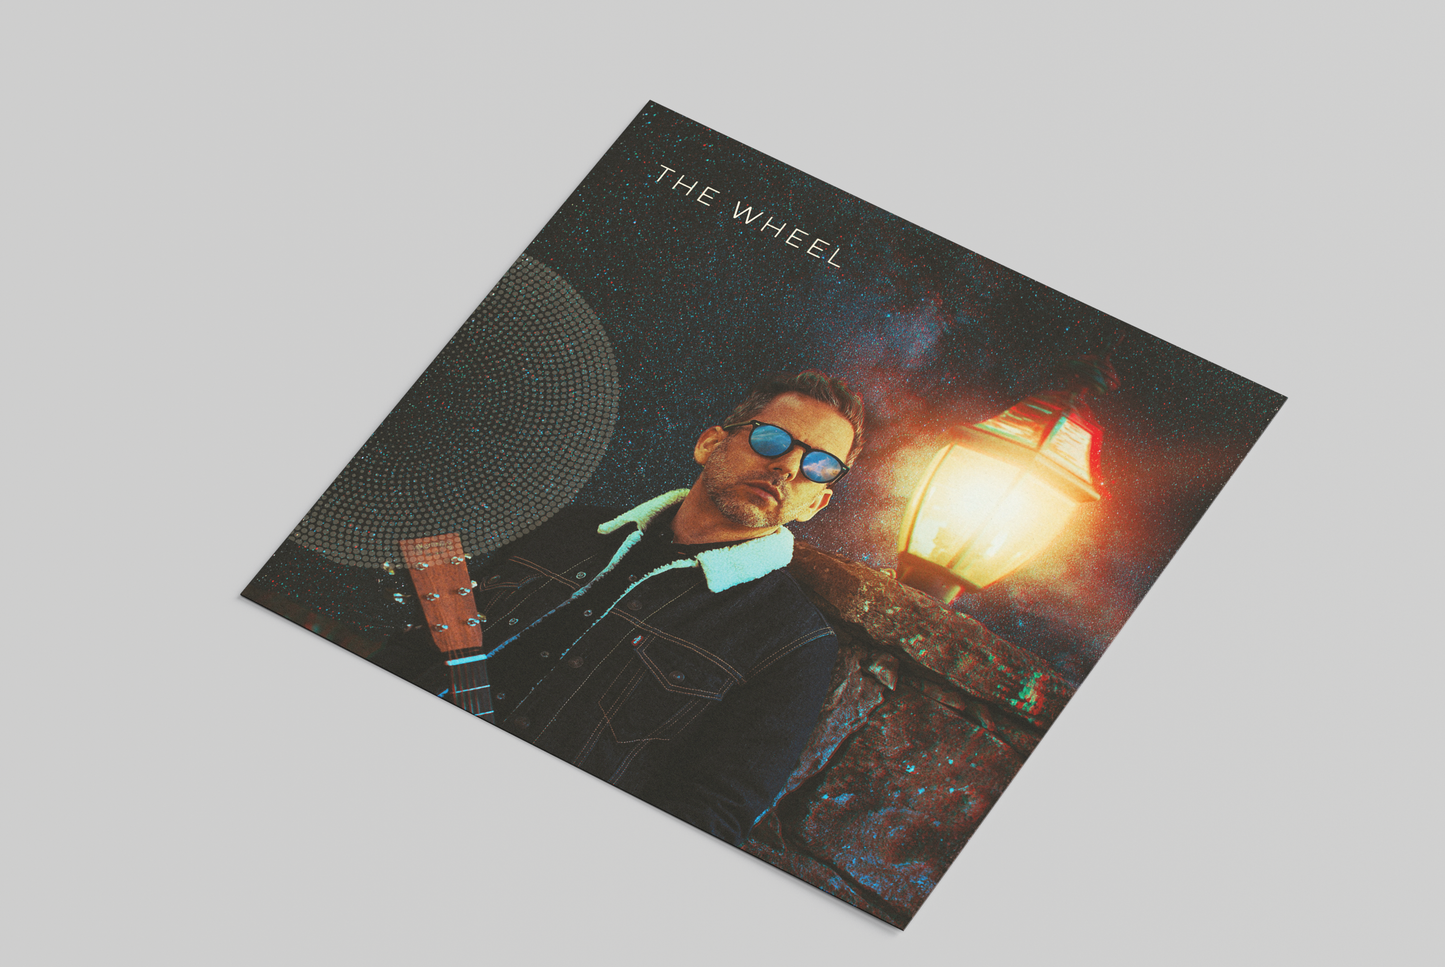 The Wheel Debut Album (Limited Edition Blue Marble 12 inch Vinyl LP)